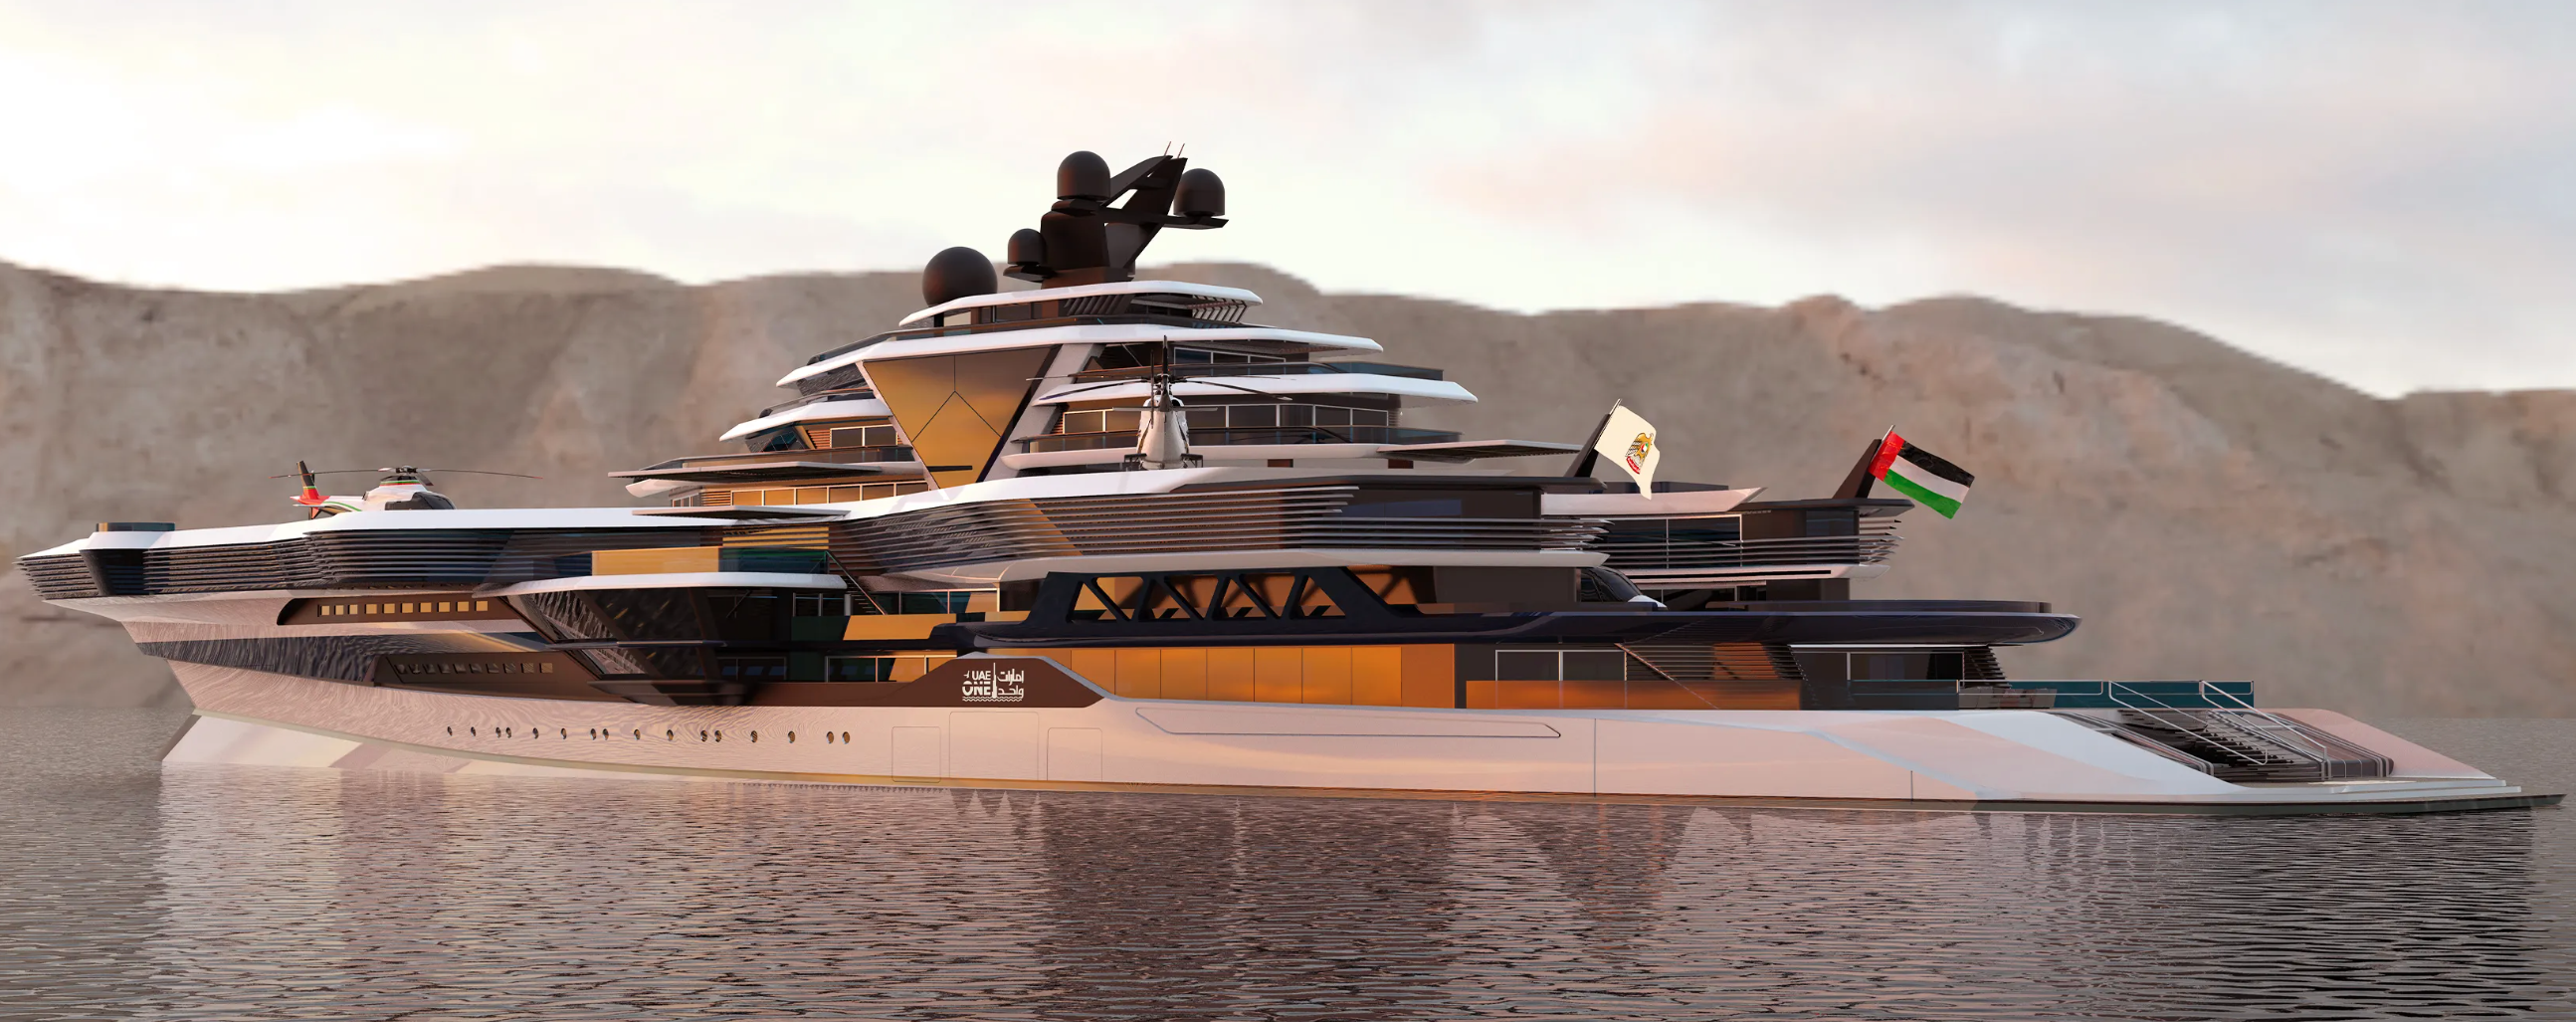 The UAE’s Flagship Luxury Yacht Took Design Cues from U.S. Aircraft Carriers